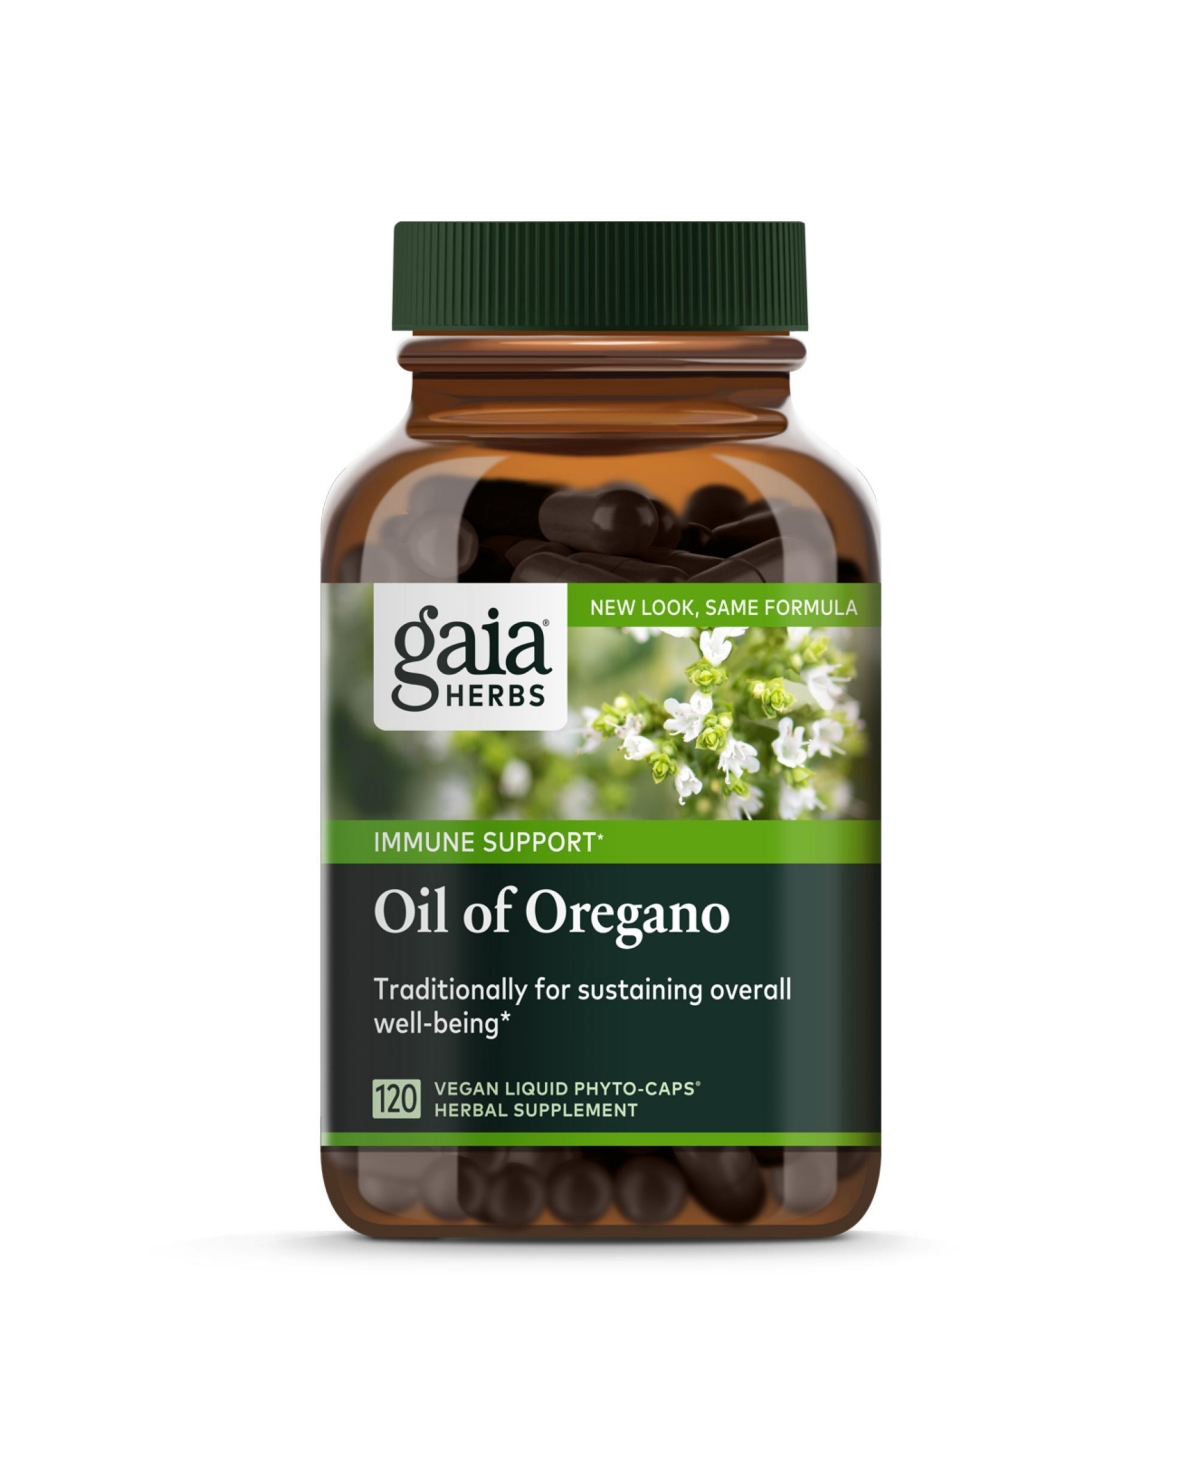 Oil of Oregano - Immune and Antioxidant Support Supplement to Help Sustain Overall Well-Being - With Oregano Oil, Carvacrol, and Thymol - 1